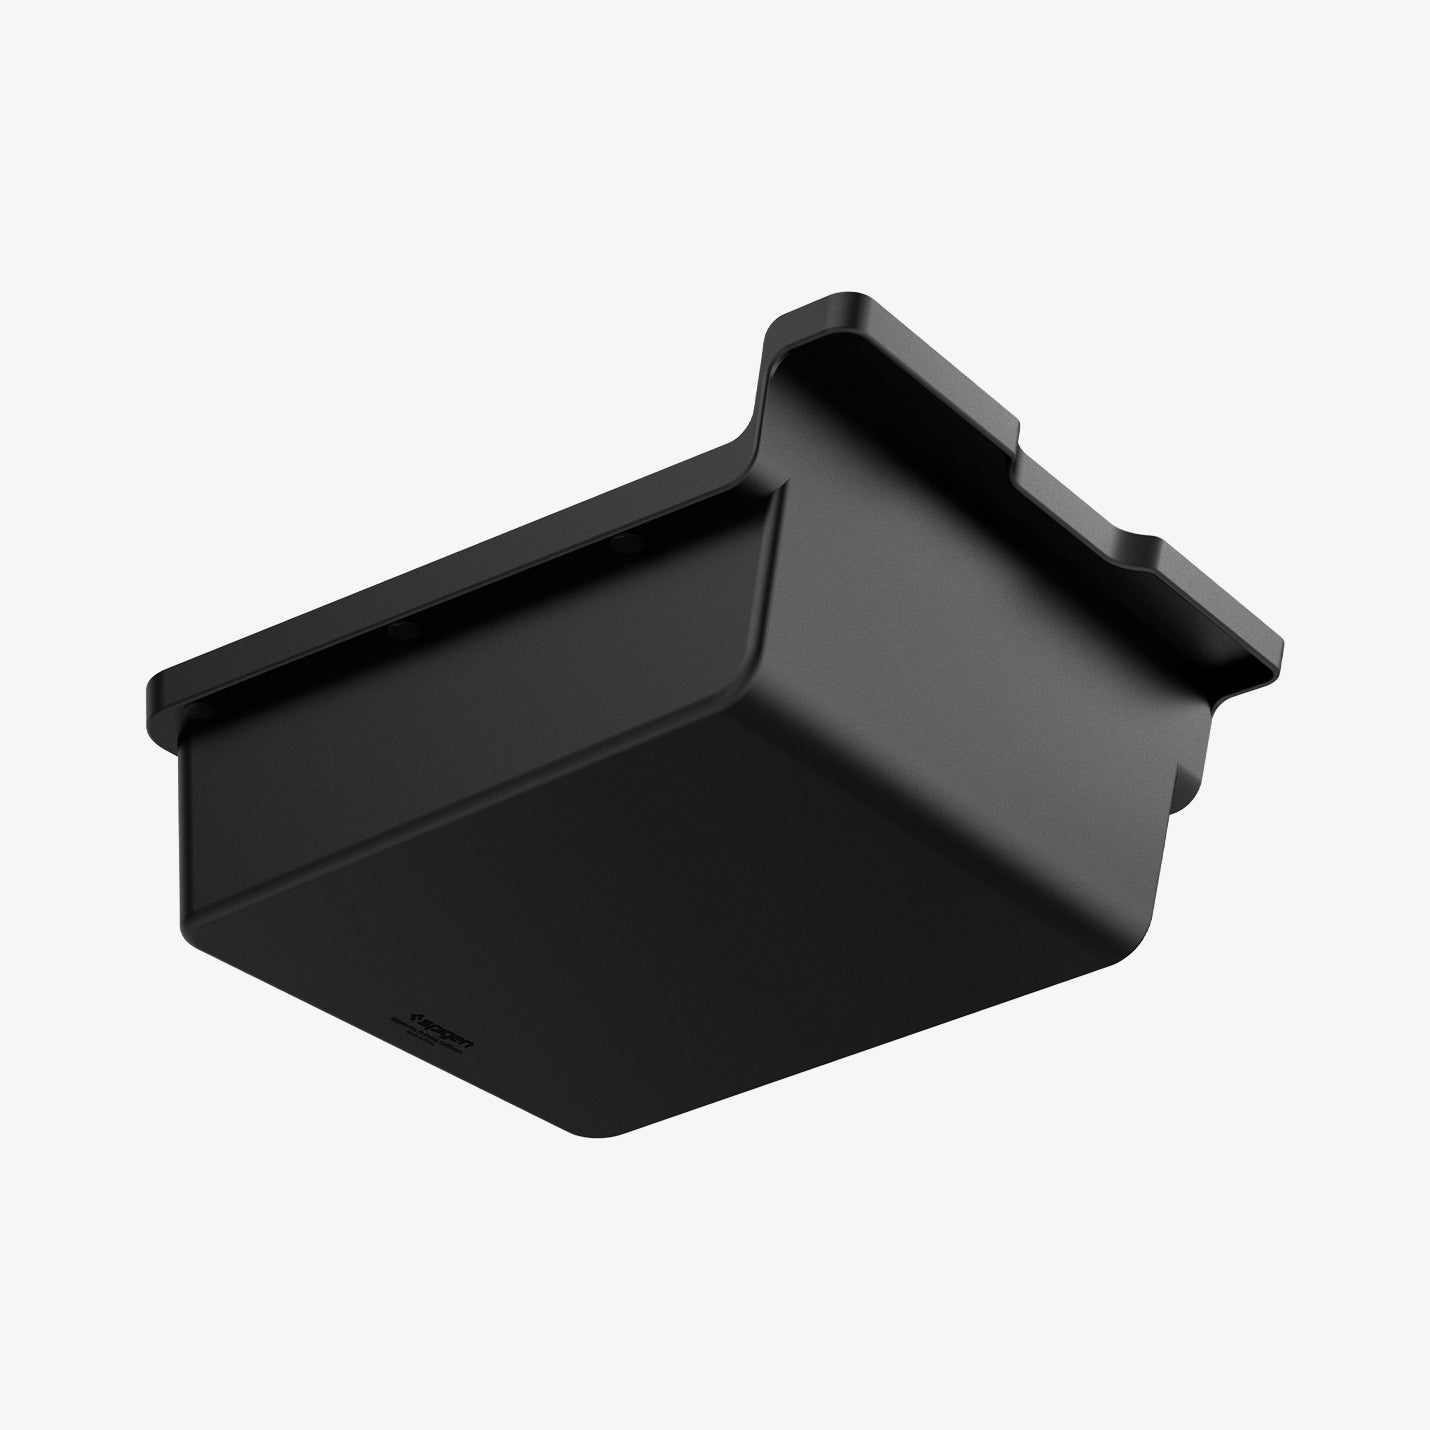 ACP04508 - Tesla Model y & 3 Center Console Organizer Tray in black showing the back, bottom and side